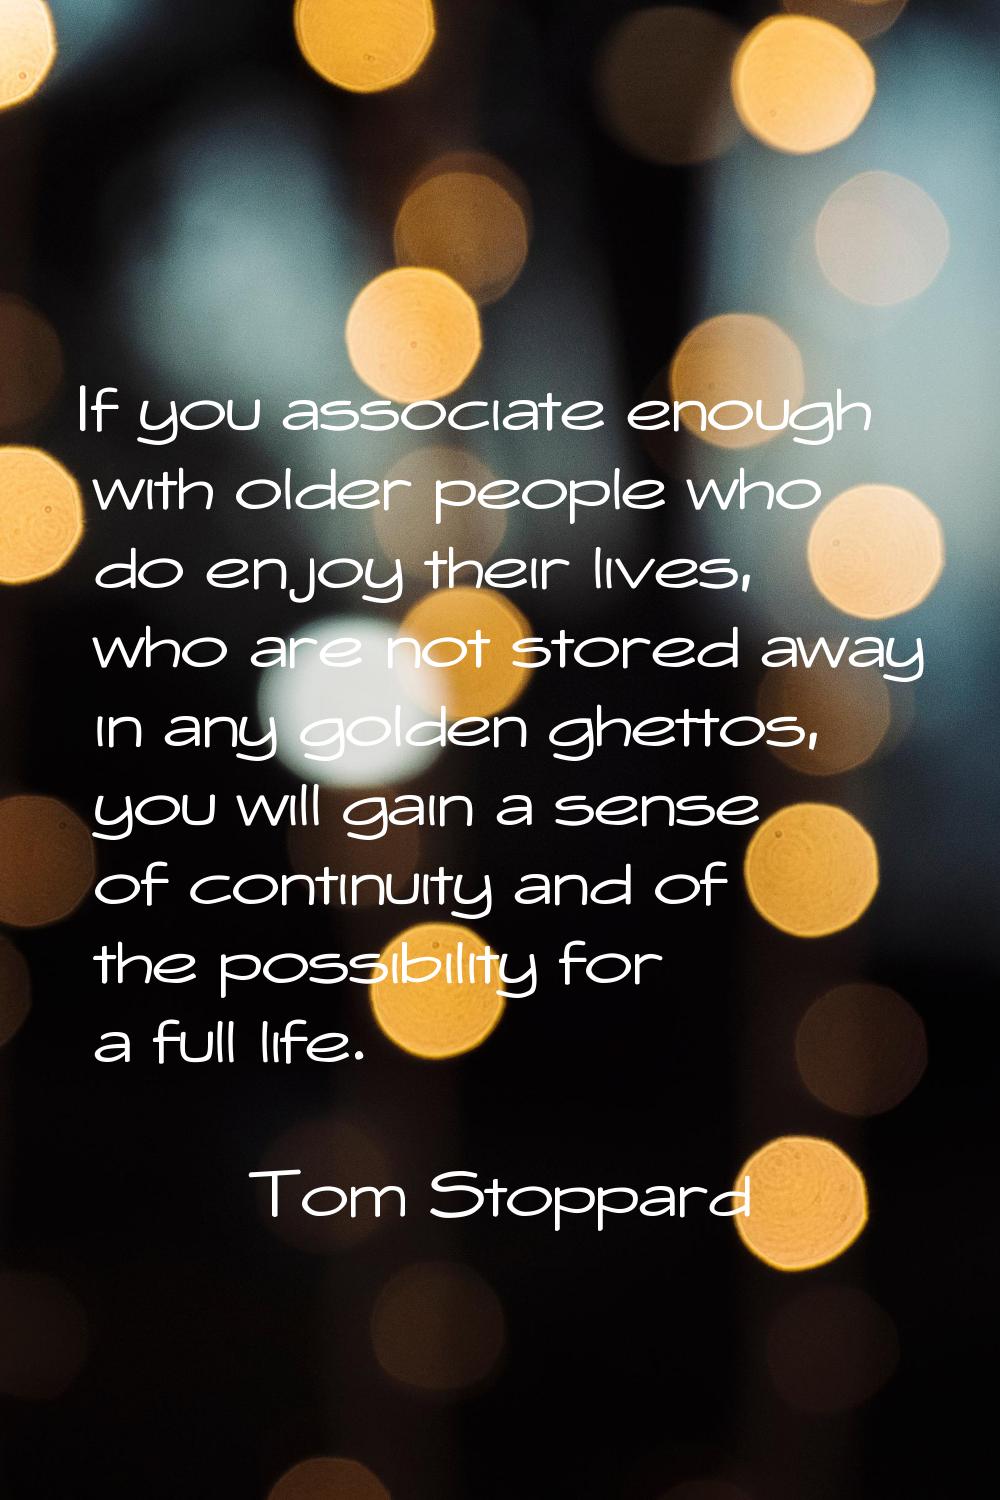 If you associate enough with older people who do enjoy their lives, who are not stored away in any 